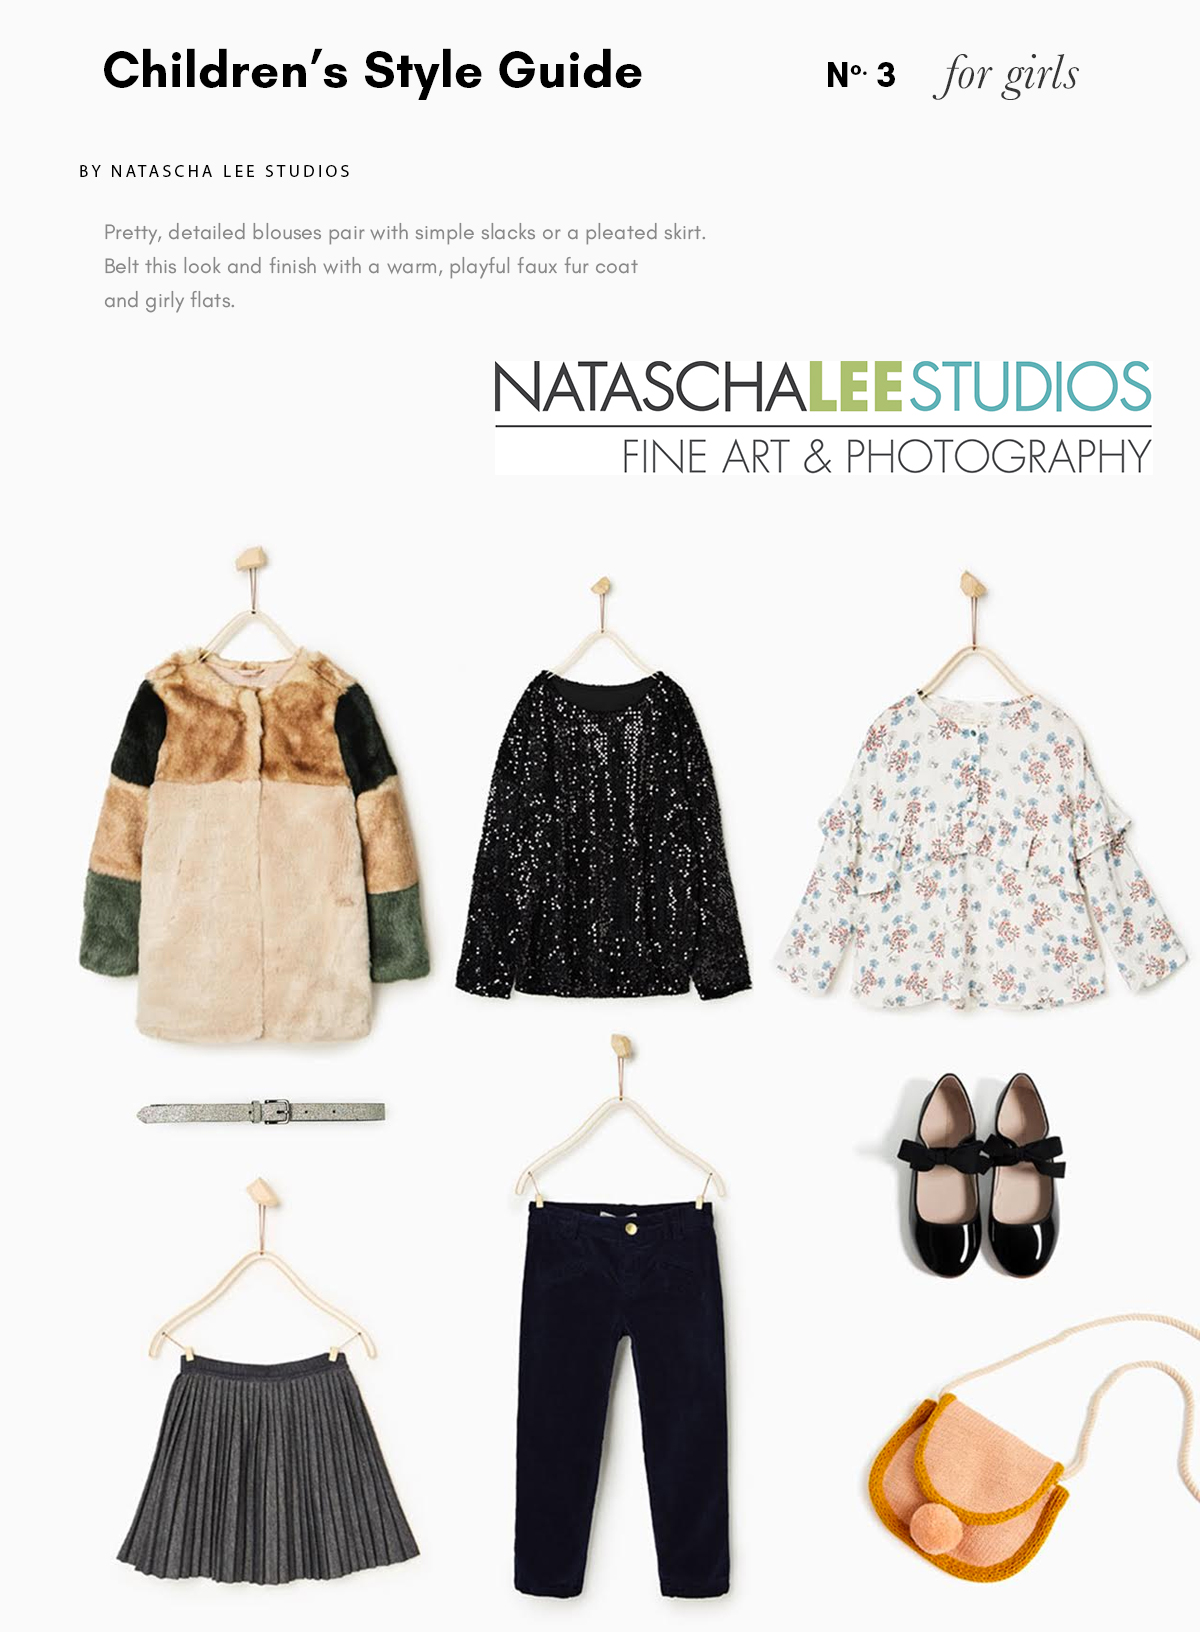 Children's Photography Style Guide - #3 for Girls